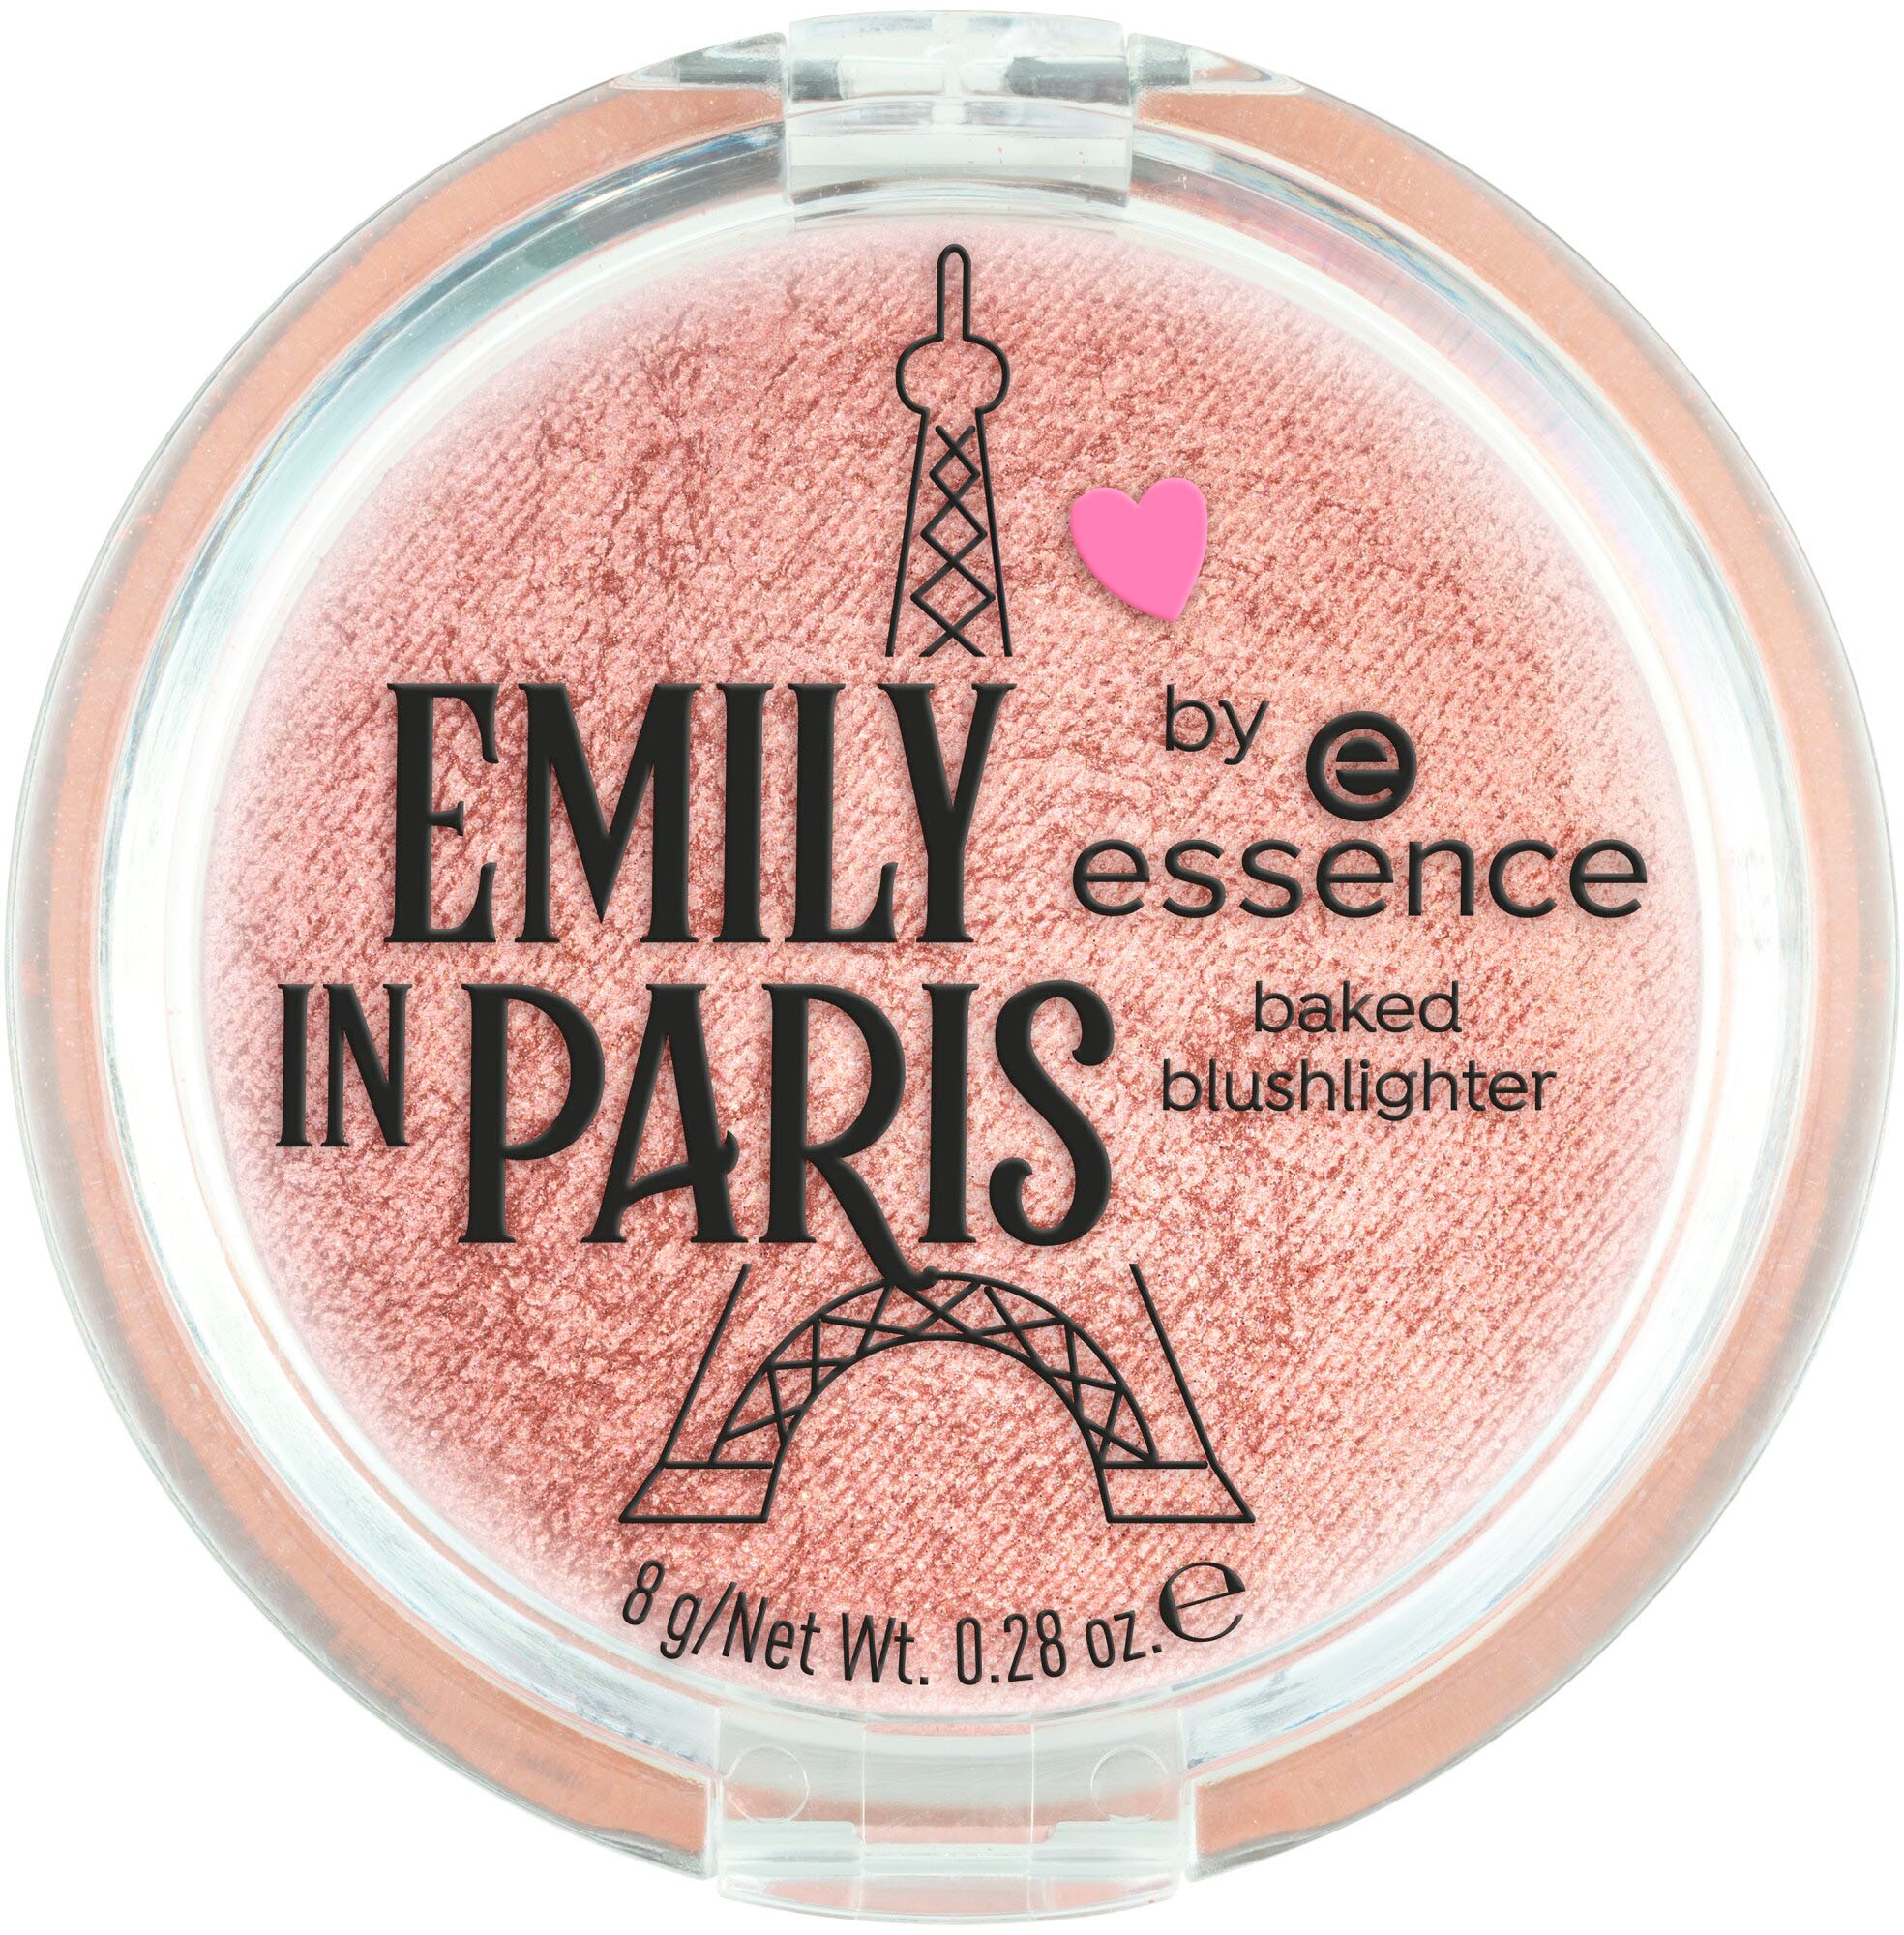 Essence Rouge »EMILY IN PARIS by essence baked blushlighter«, (Packung, 3 tlg.)